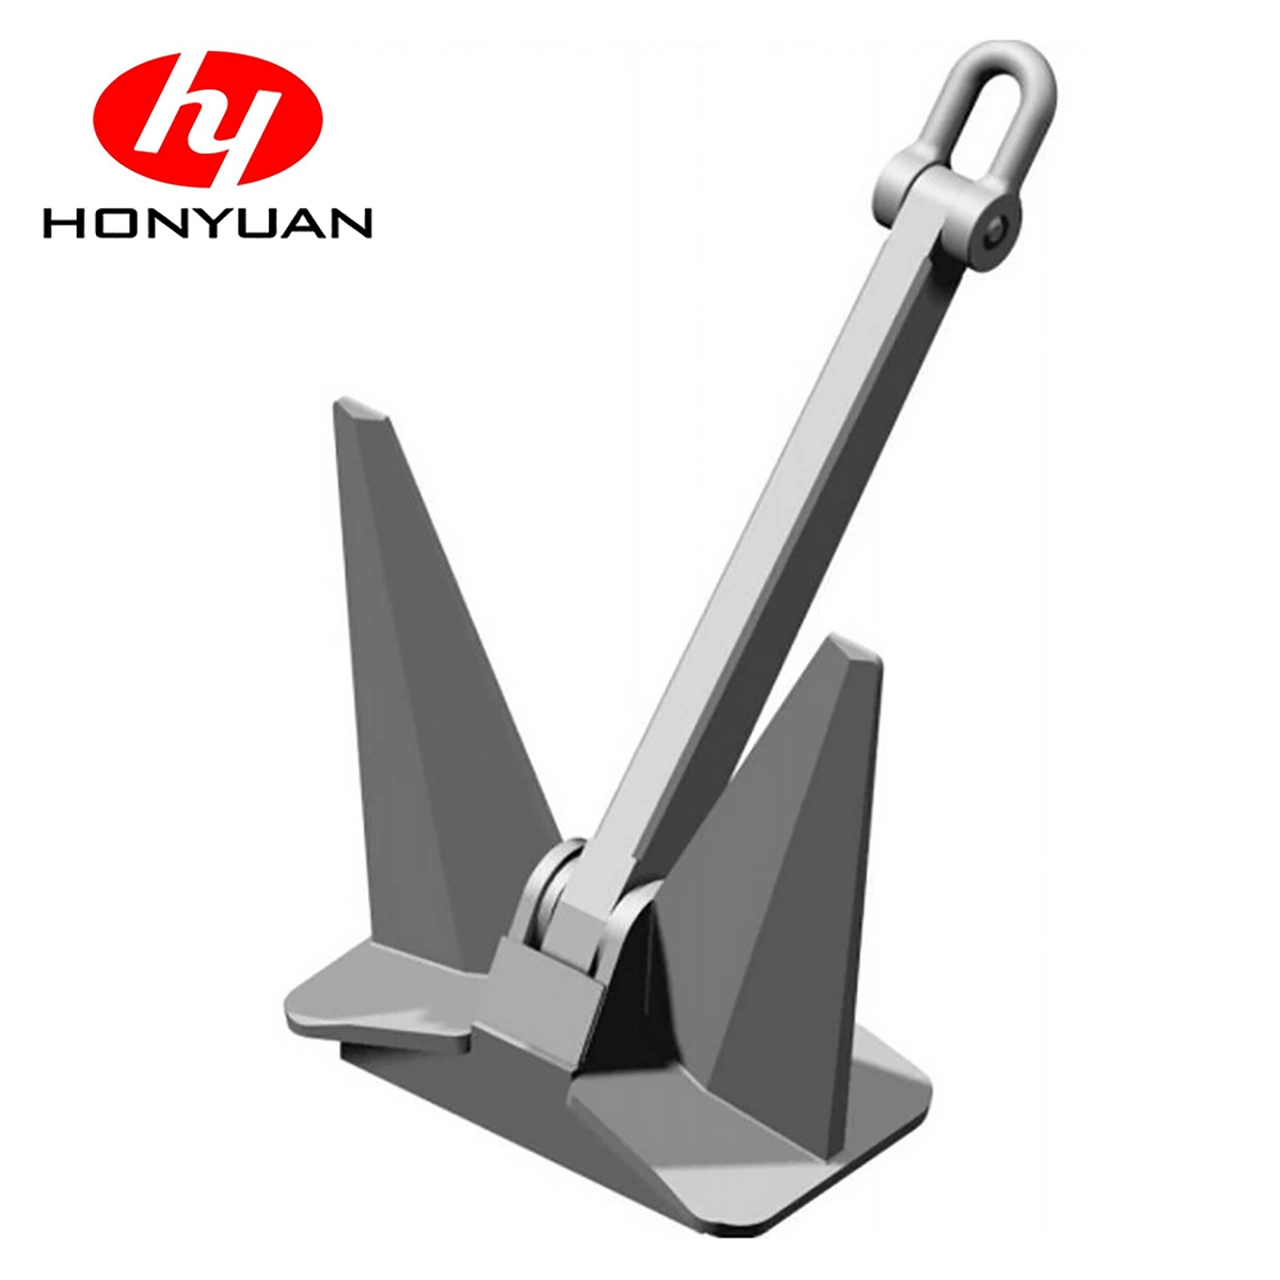 Pool Anchor, Hall Anchor, Japan Anchor, Stockless Anchor Steel or Stainless Steel Marine Ship Anchor